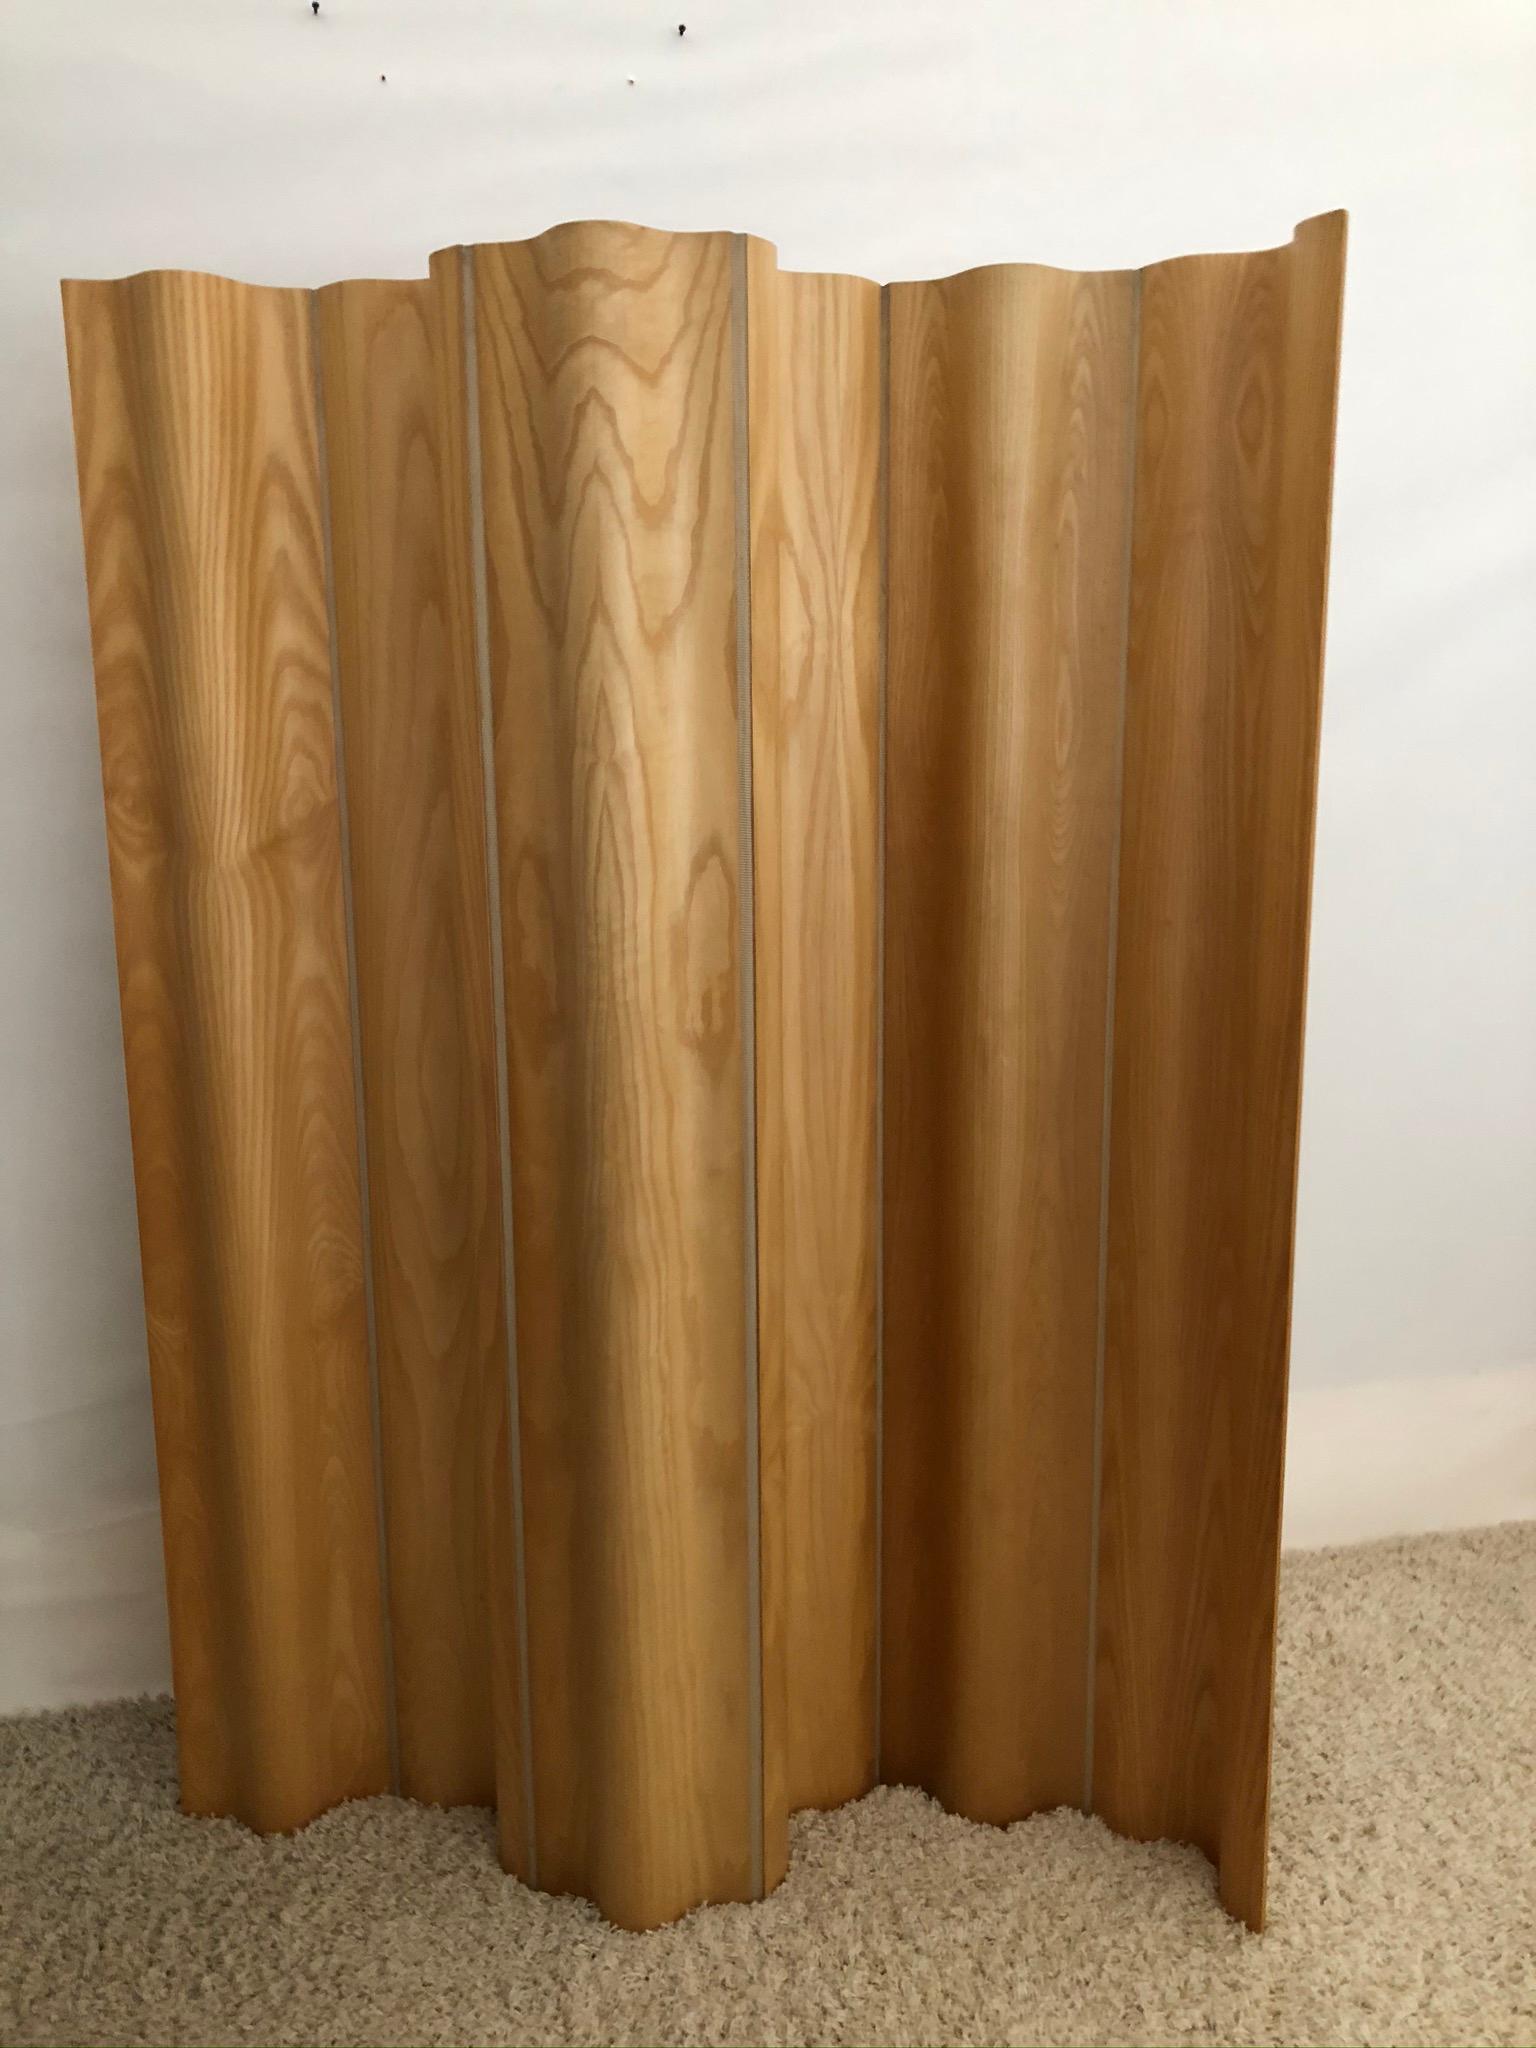 Hand-Crafted Charles and Ray Eames Ash/Birch Molded Plywood Folding Room Divider Screen